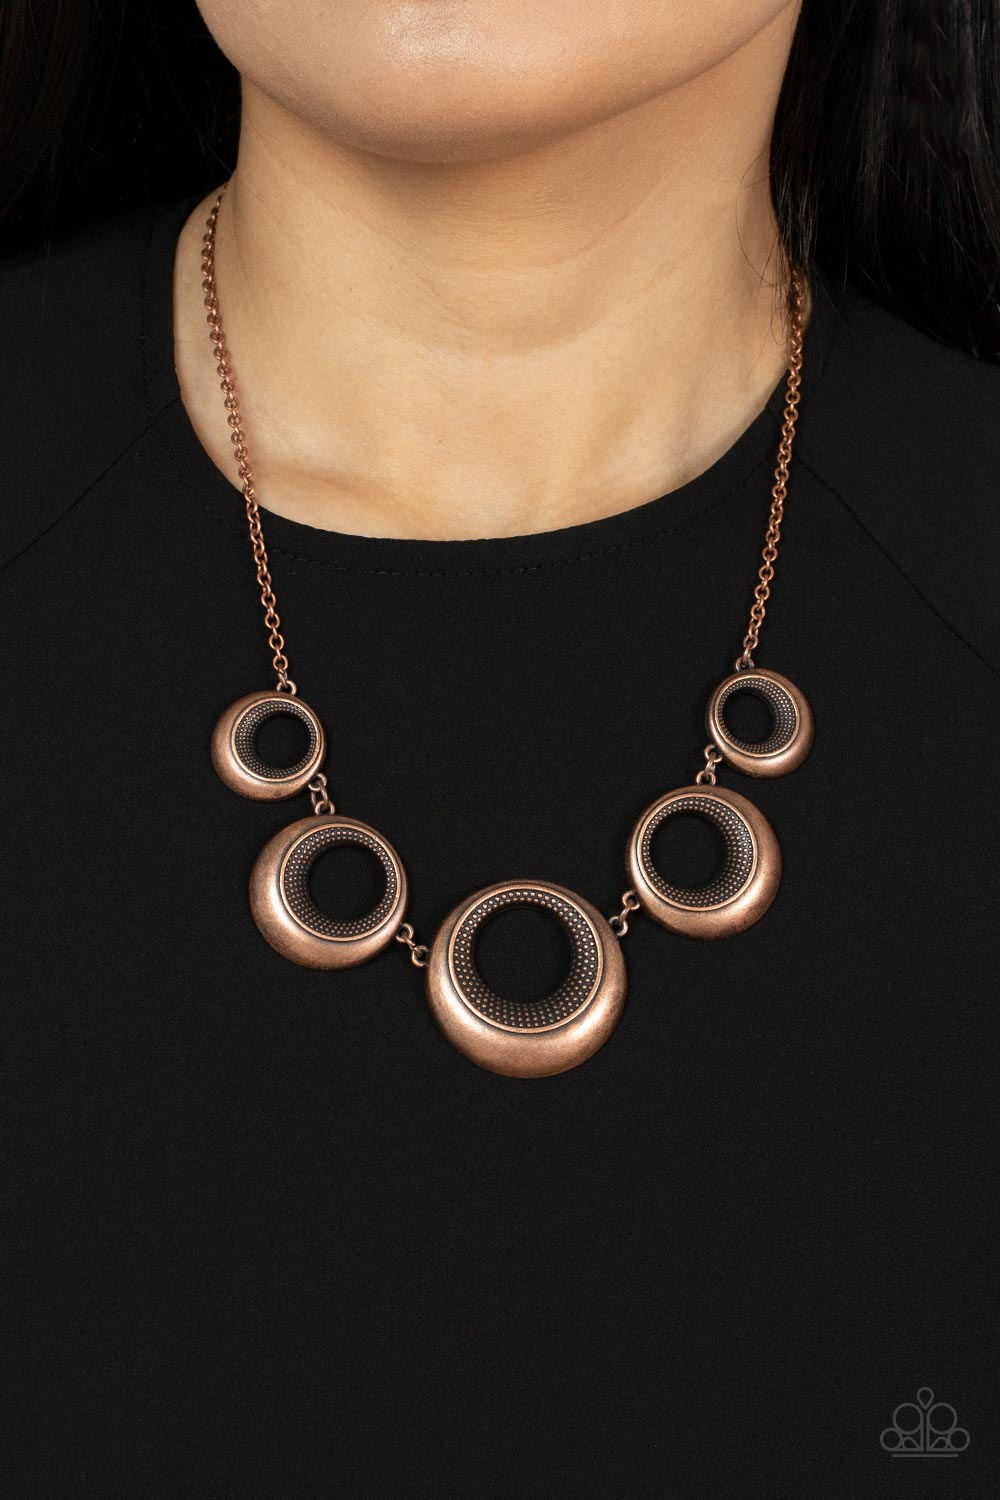 Solar Cycle Copper Necklace - Paparazzi Accessories  Featuring studded centers, an antiqued collection of beveled copper hoops gradually increase in size as they link below the collar for a bold metallic look. Features an adjustable clasp closure.  Sold as one individual necklace. Includes one pair of matching earrings.